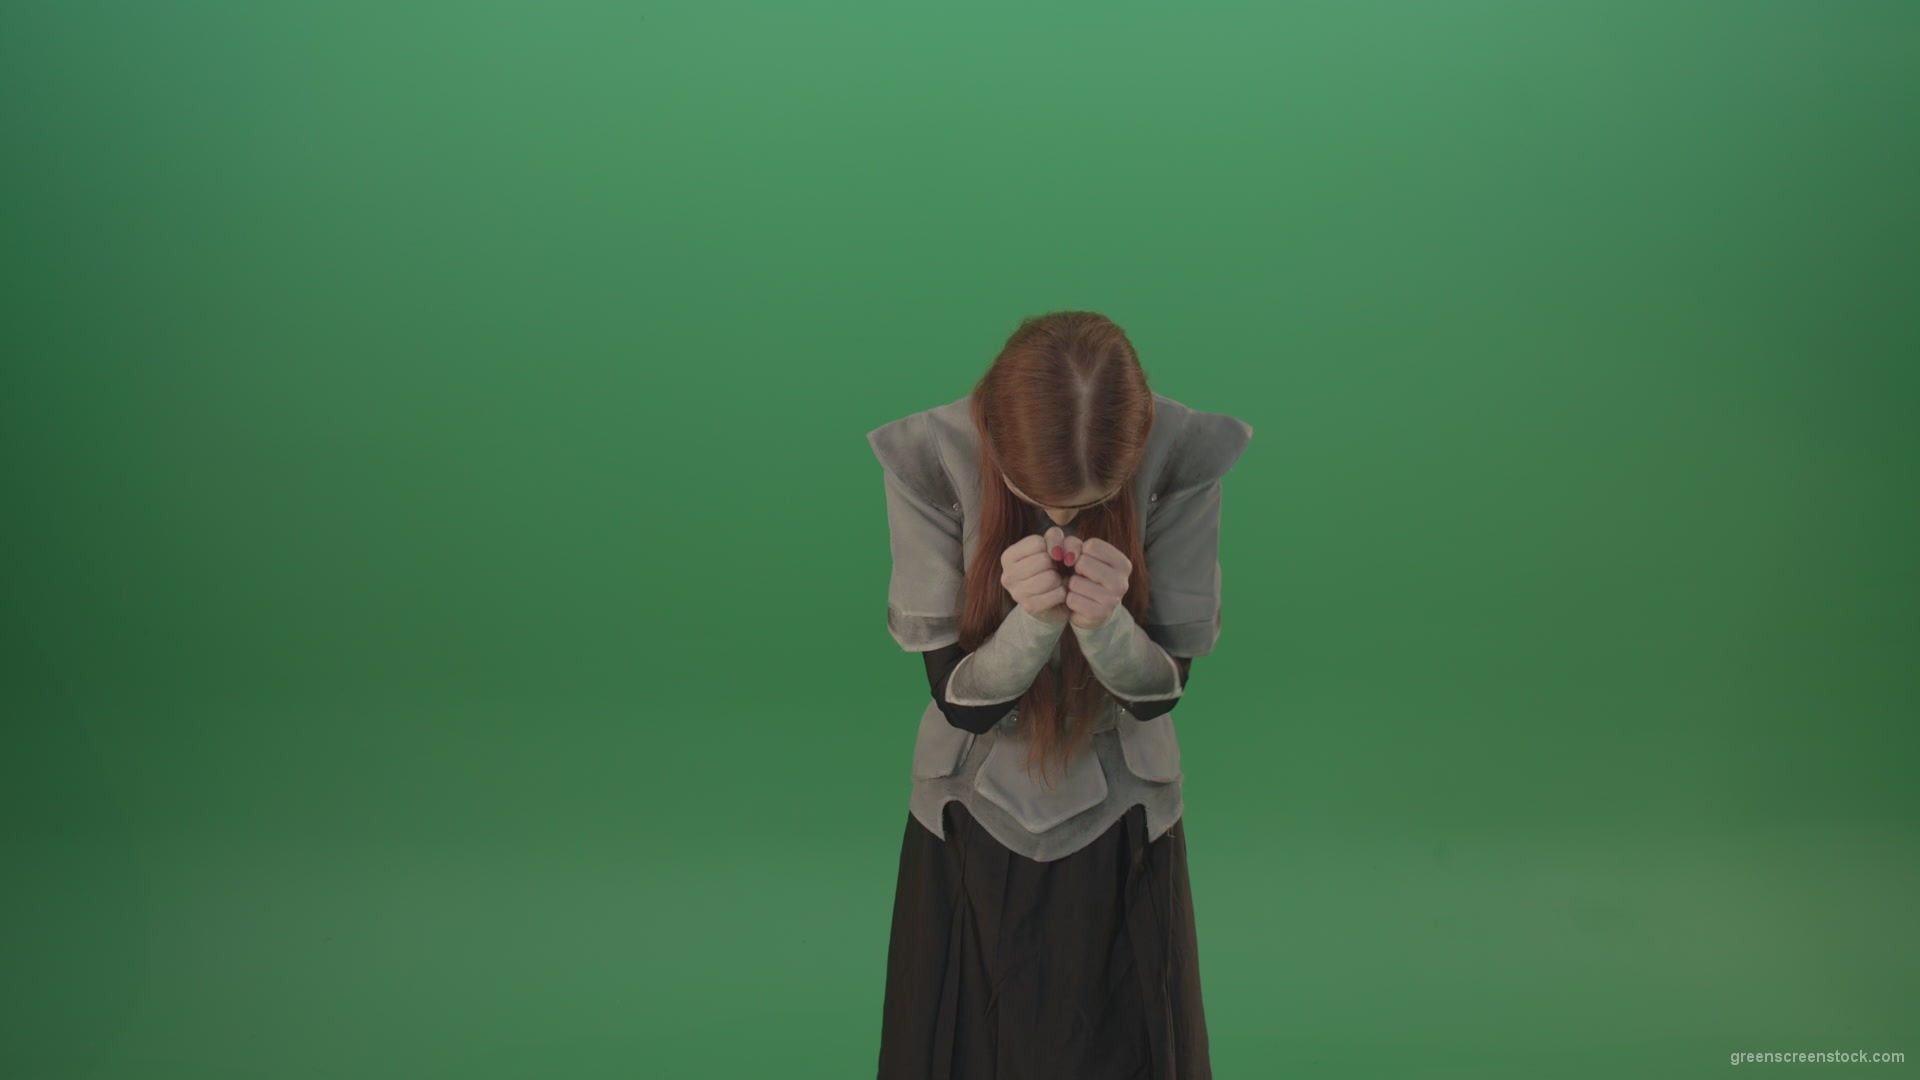 Cried-warrior-girl-releases-all-her-energy-cosplay-on-a-green-background_005 Green Screen Stock